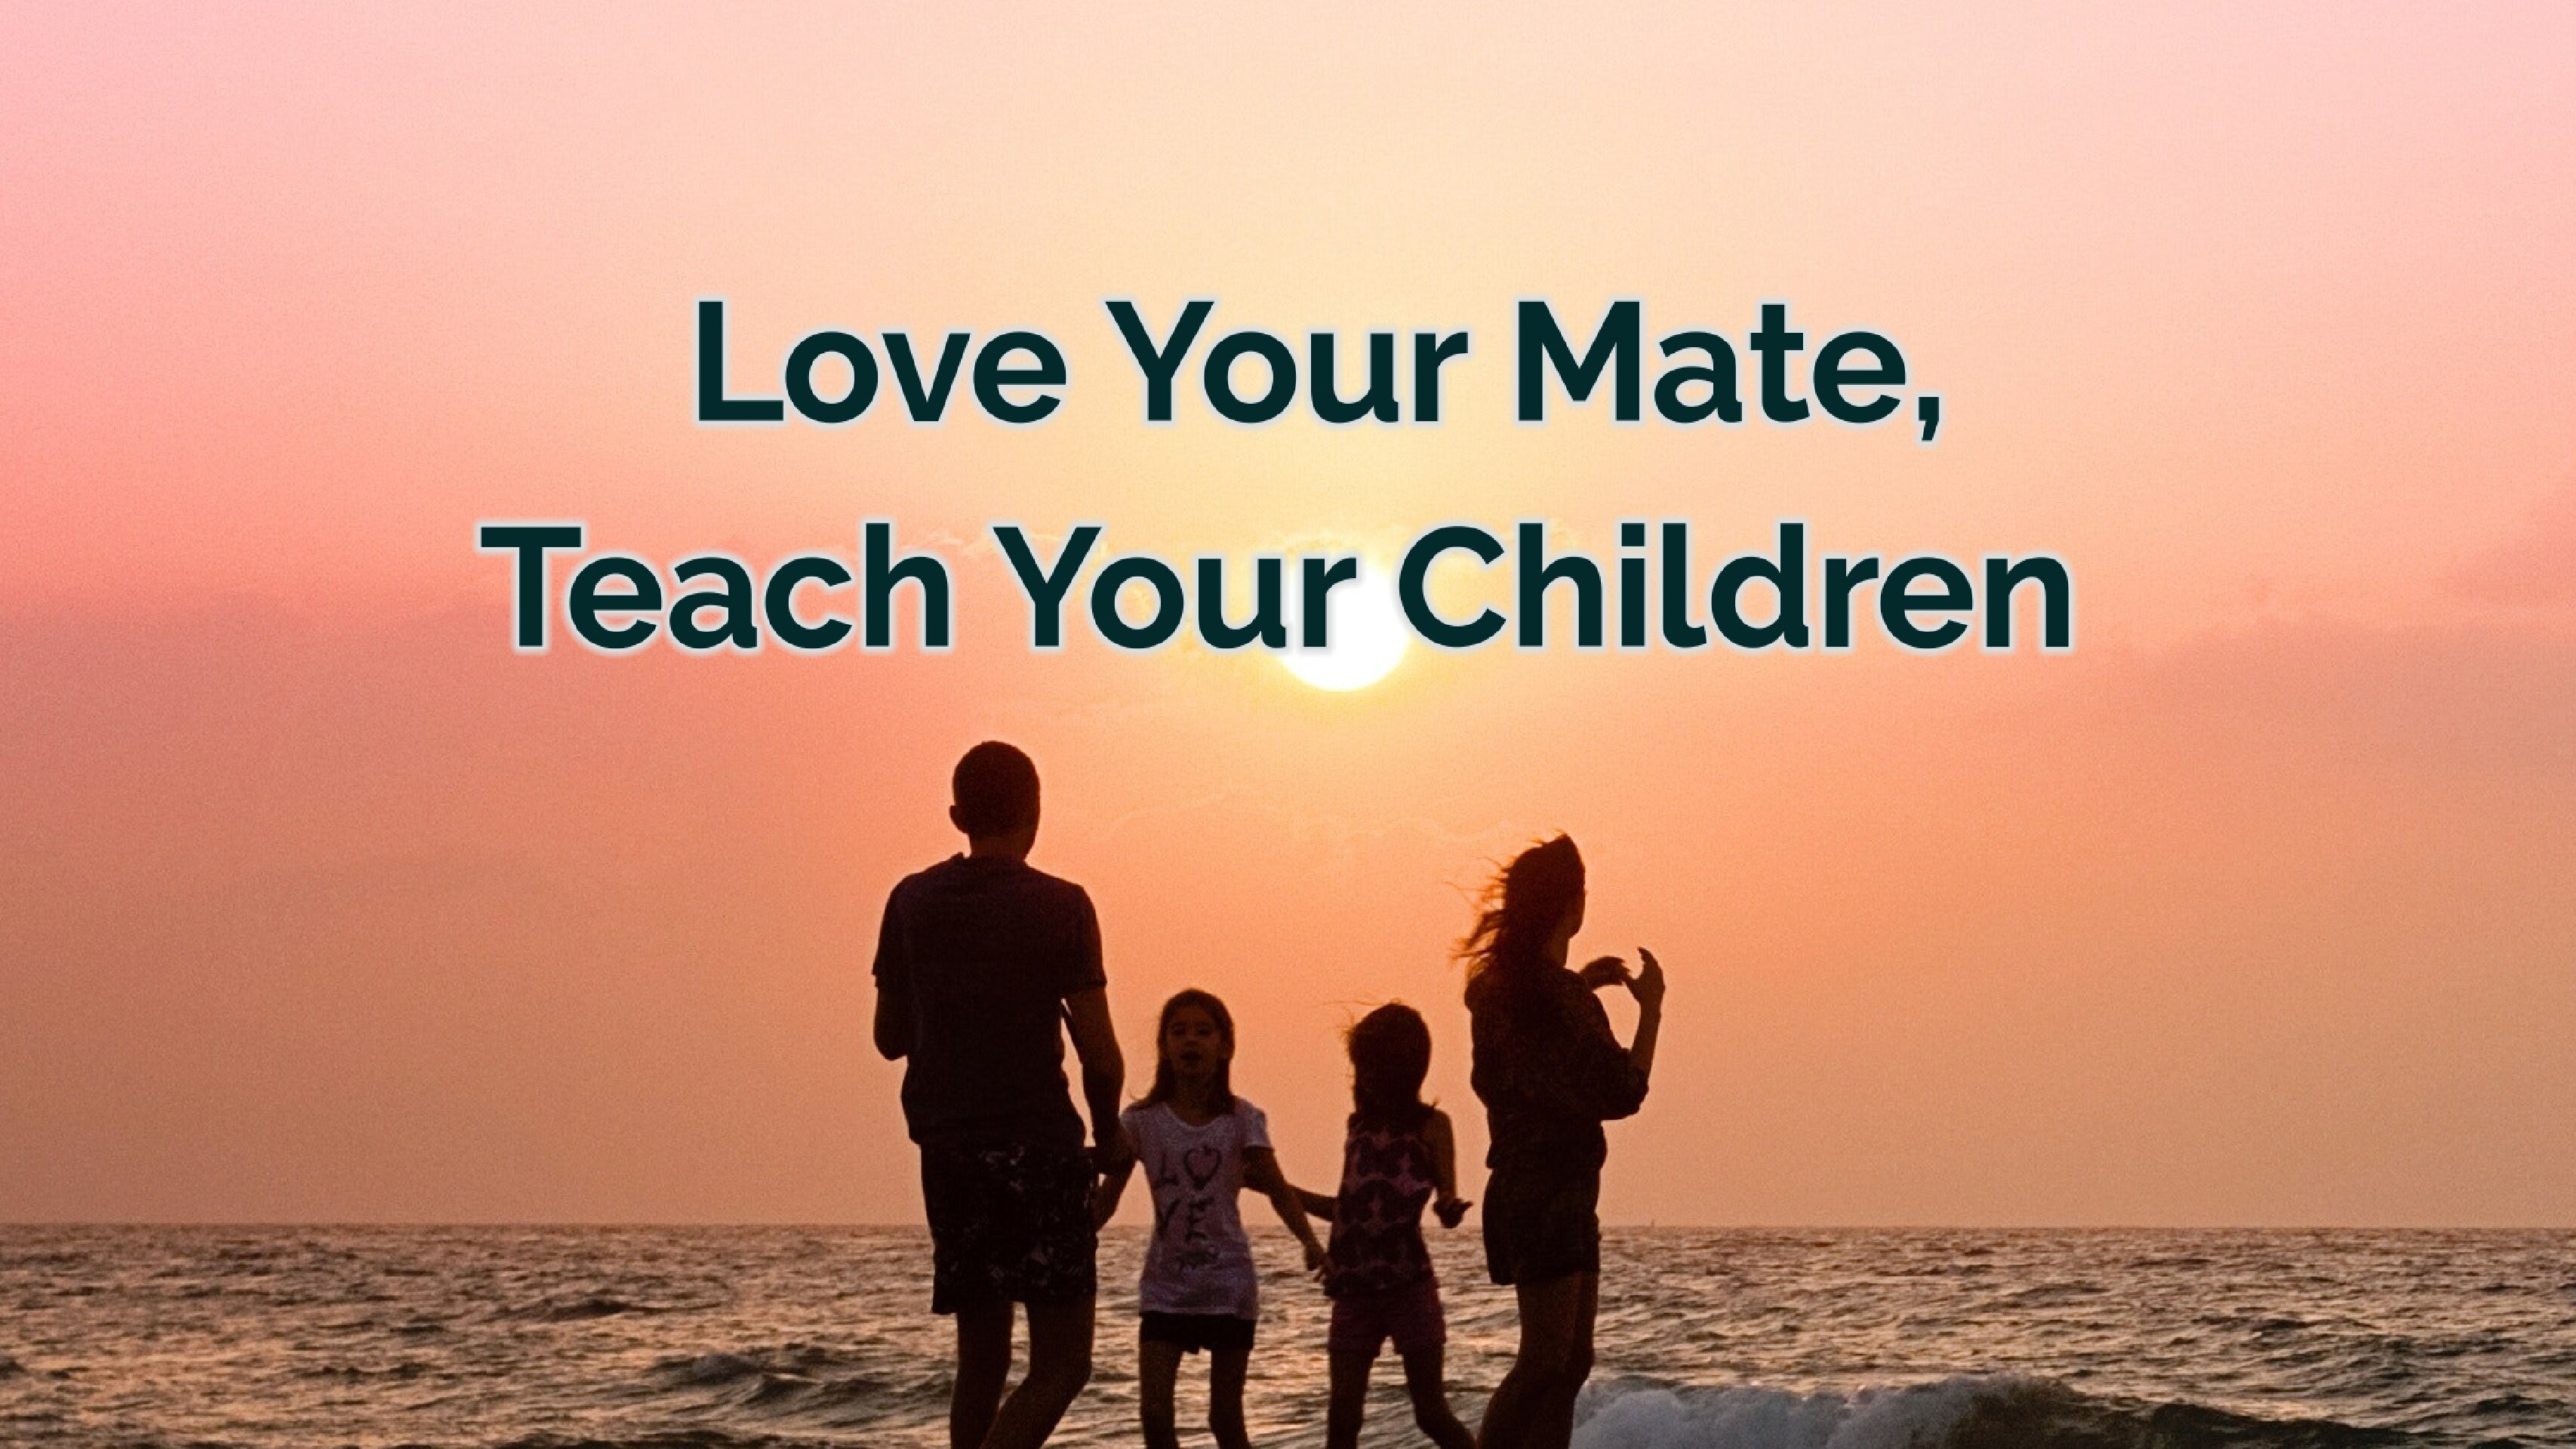 Love Your Mate, Teach Your Children